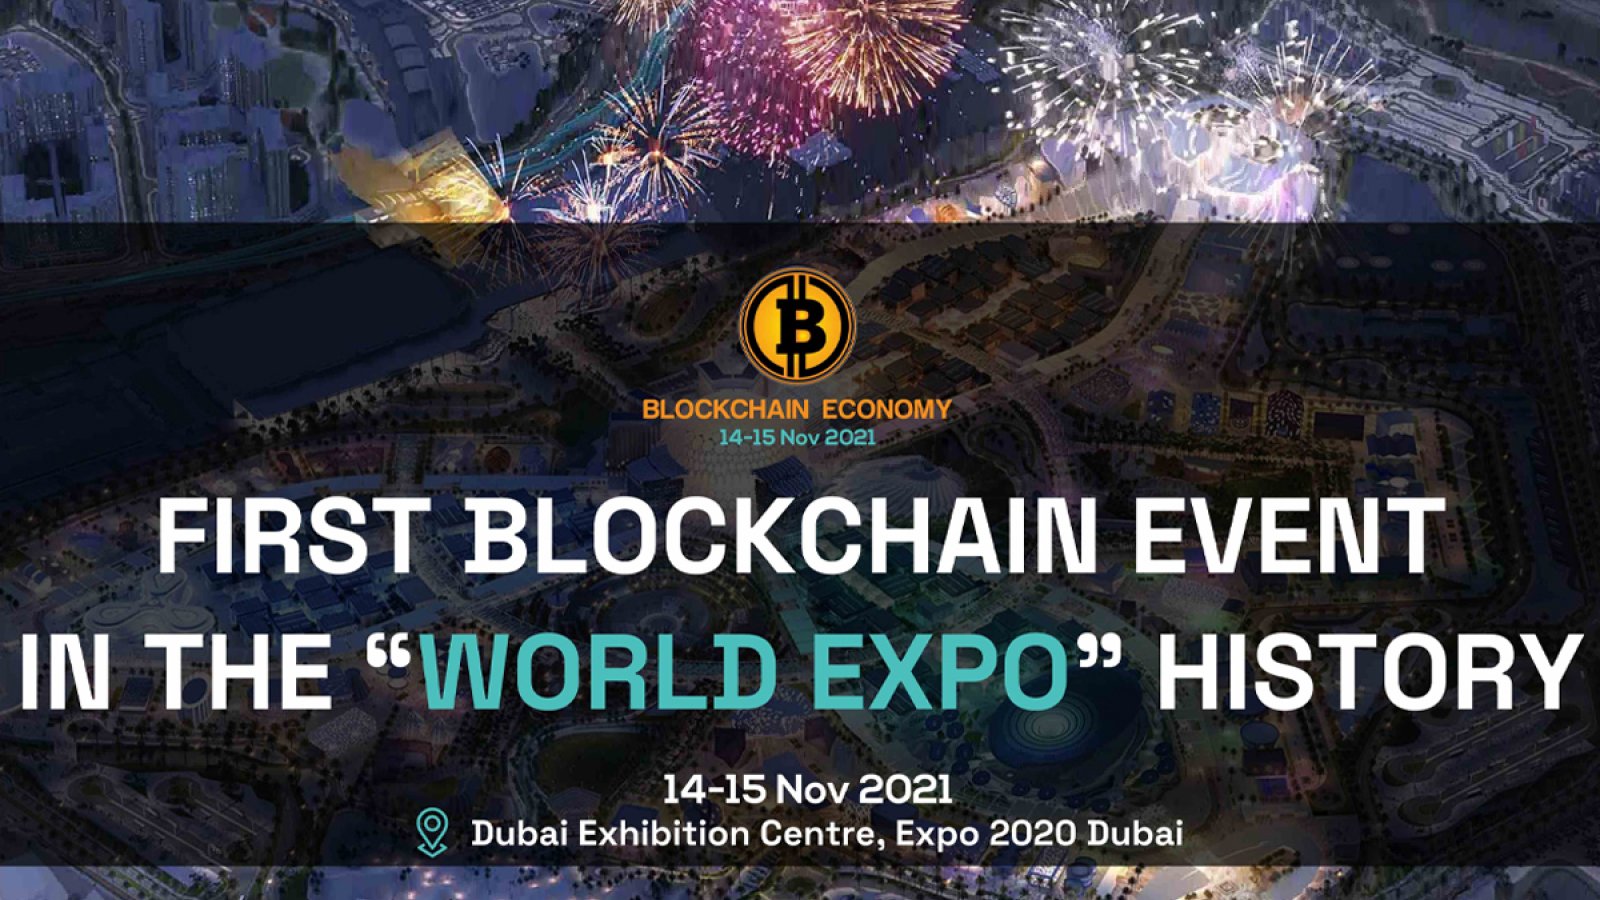 First Blockchain Event in the “World Expo” History